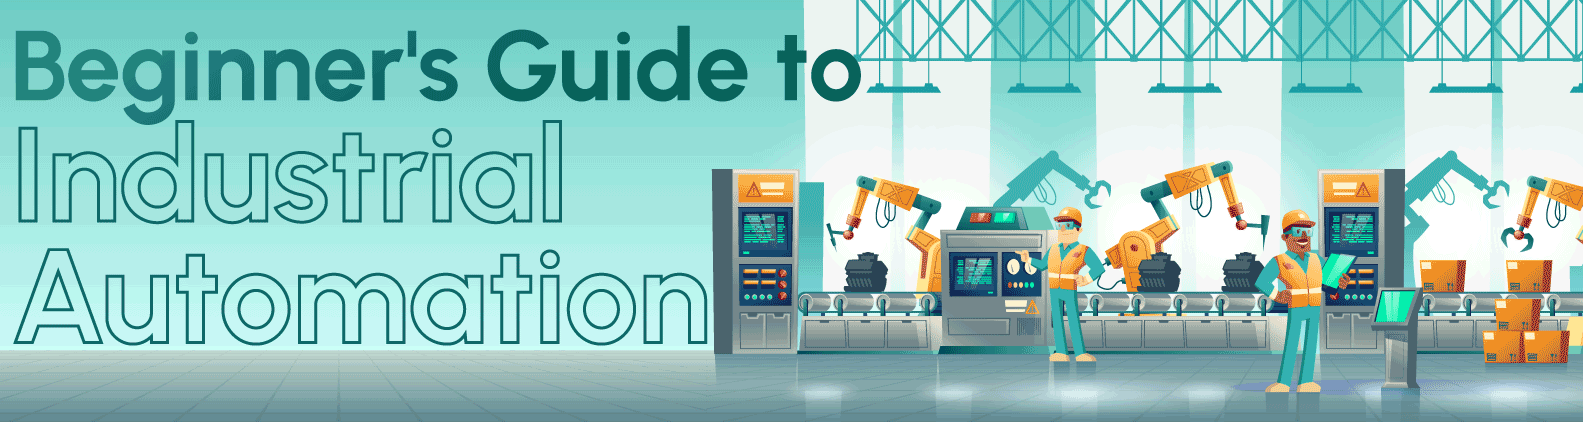 https://aptronsolutions.com/bannerimageName/Beginner's-Guide-to-Industrial-Automation (1).png